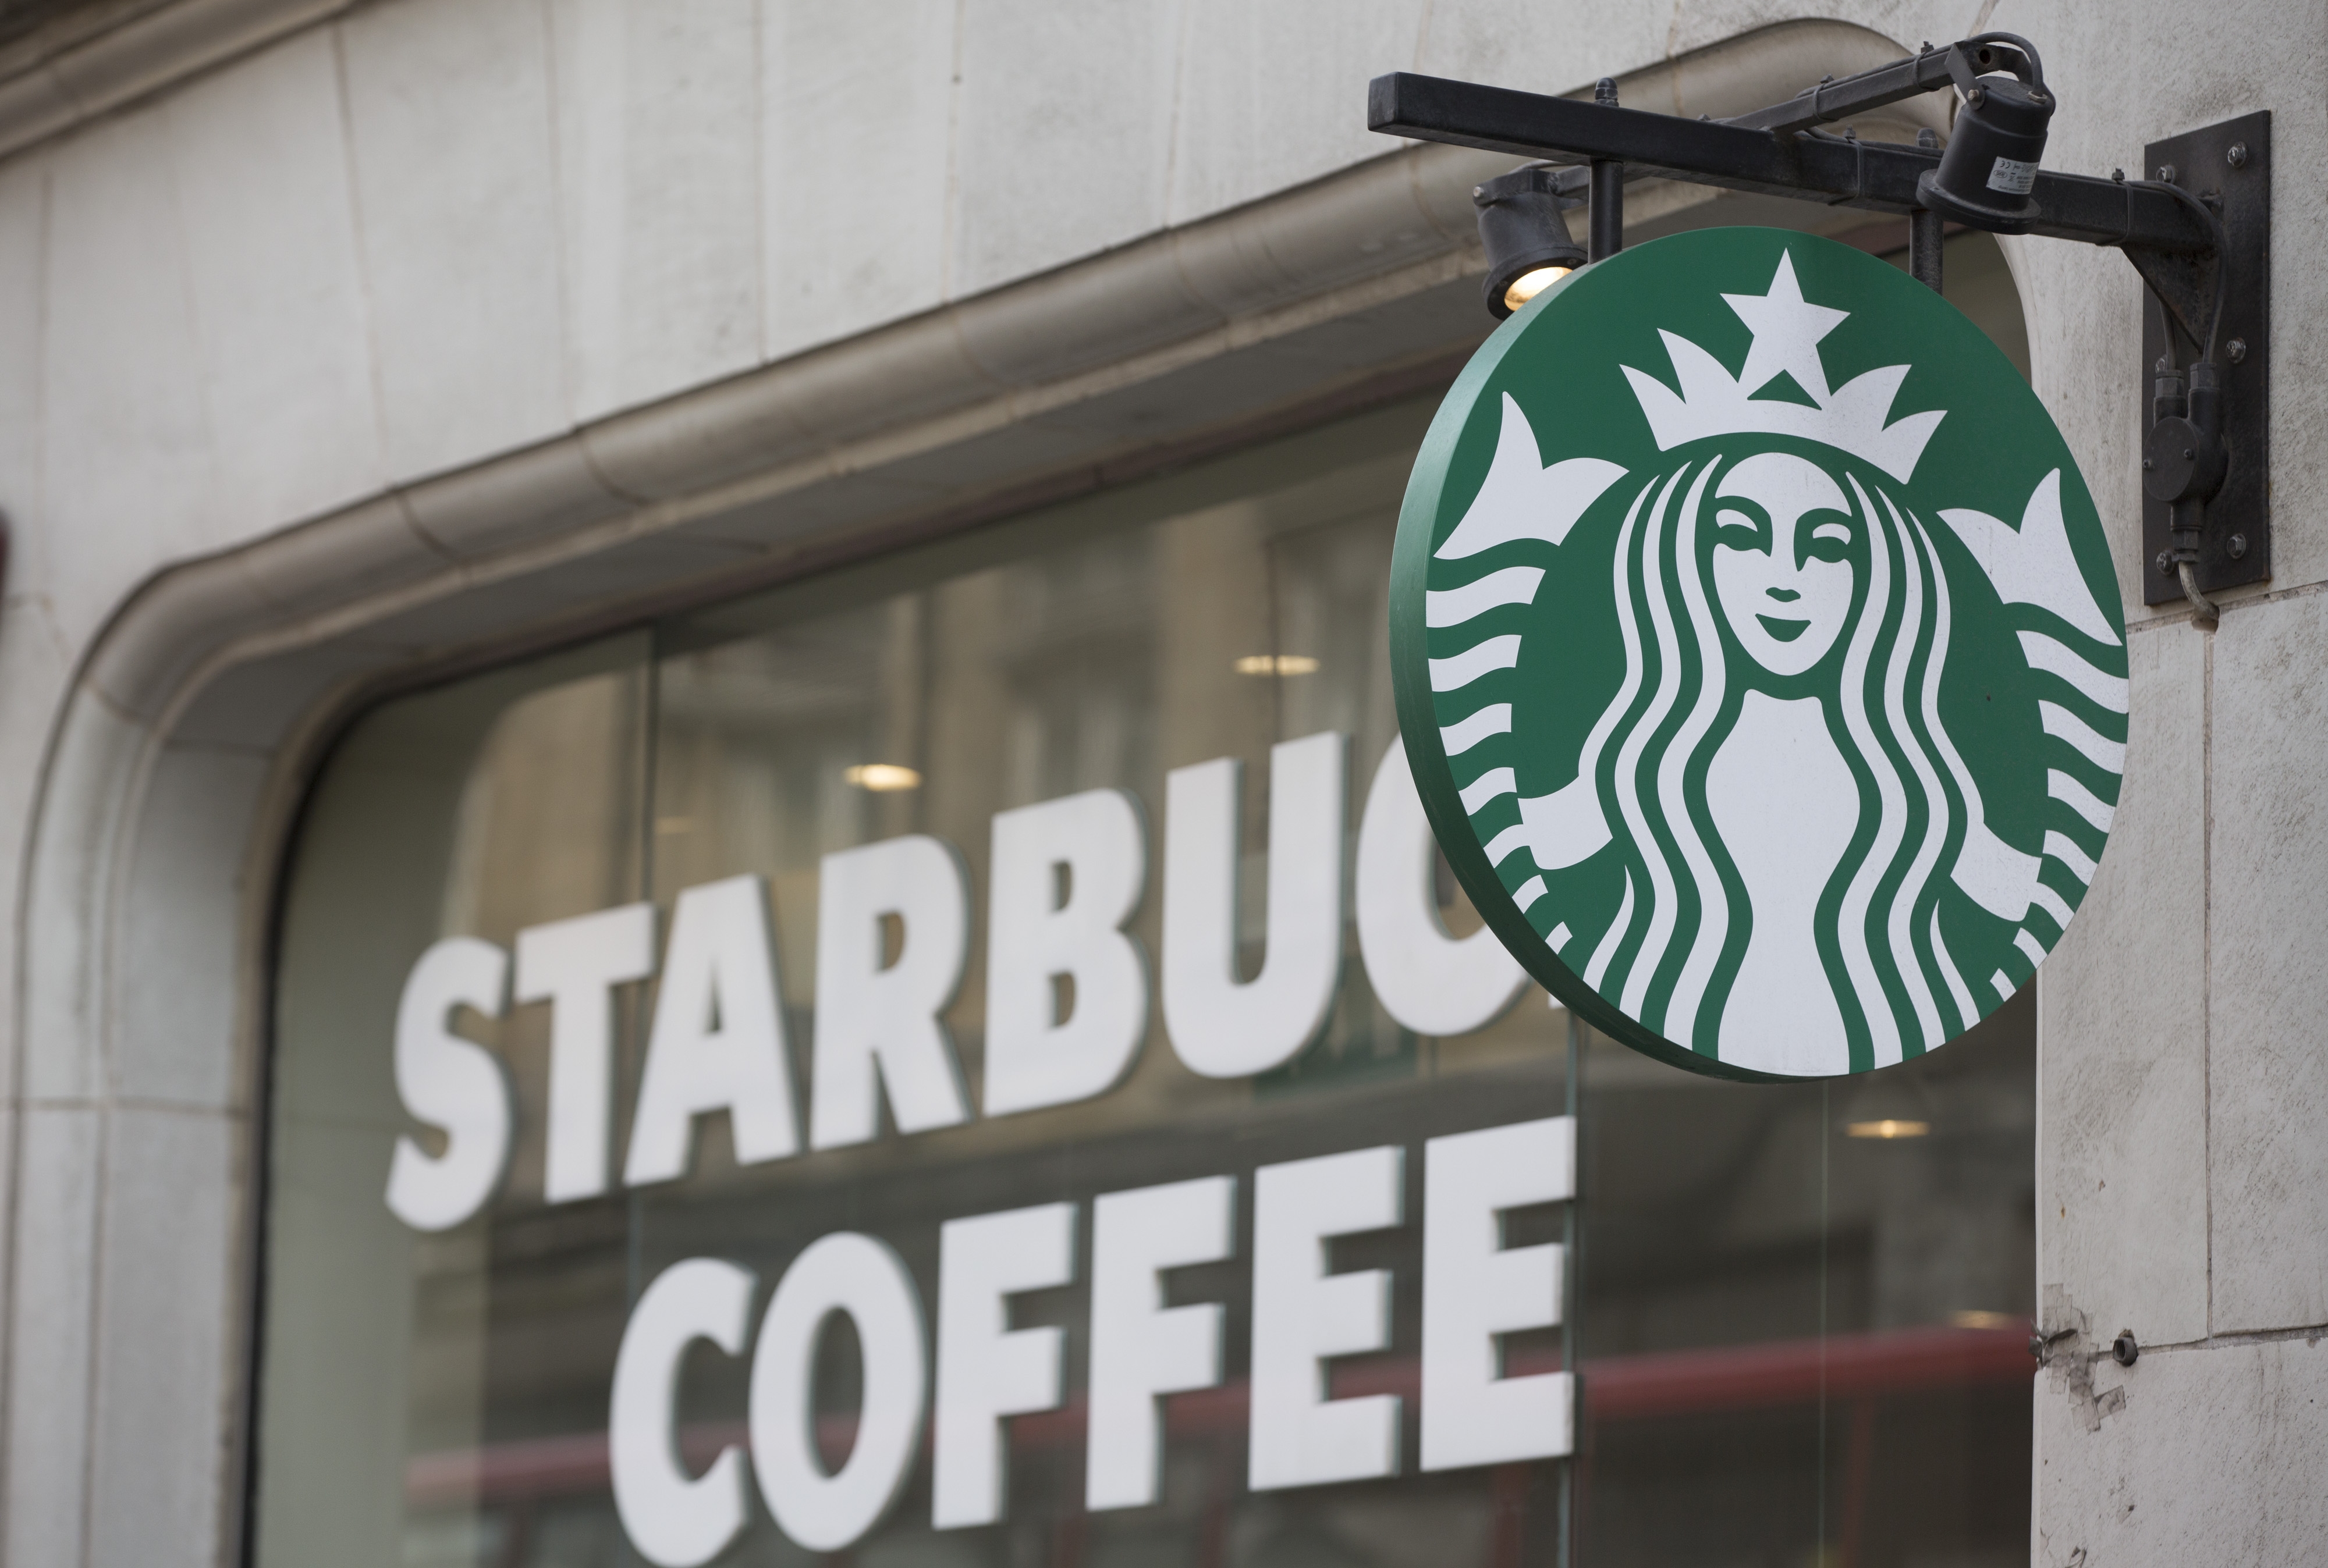 The Starbucks Corp. logo hangs outside of a coffee shop in London, U.K., on Monday, June 9, 2014. (Bloomberg&mdash;Getty Images)